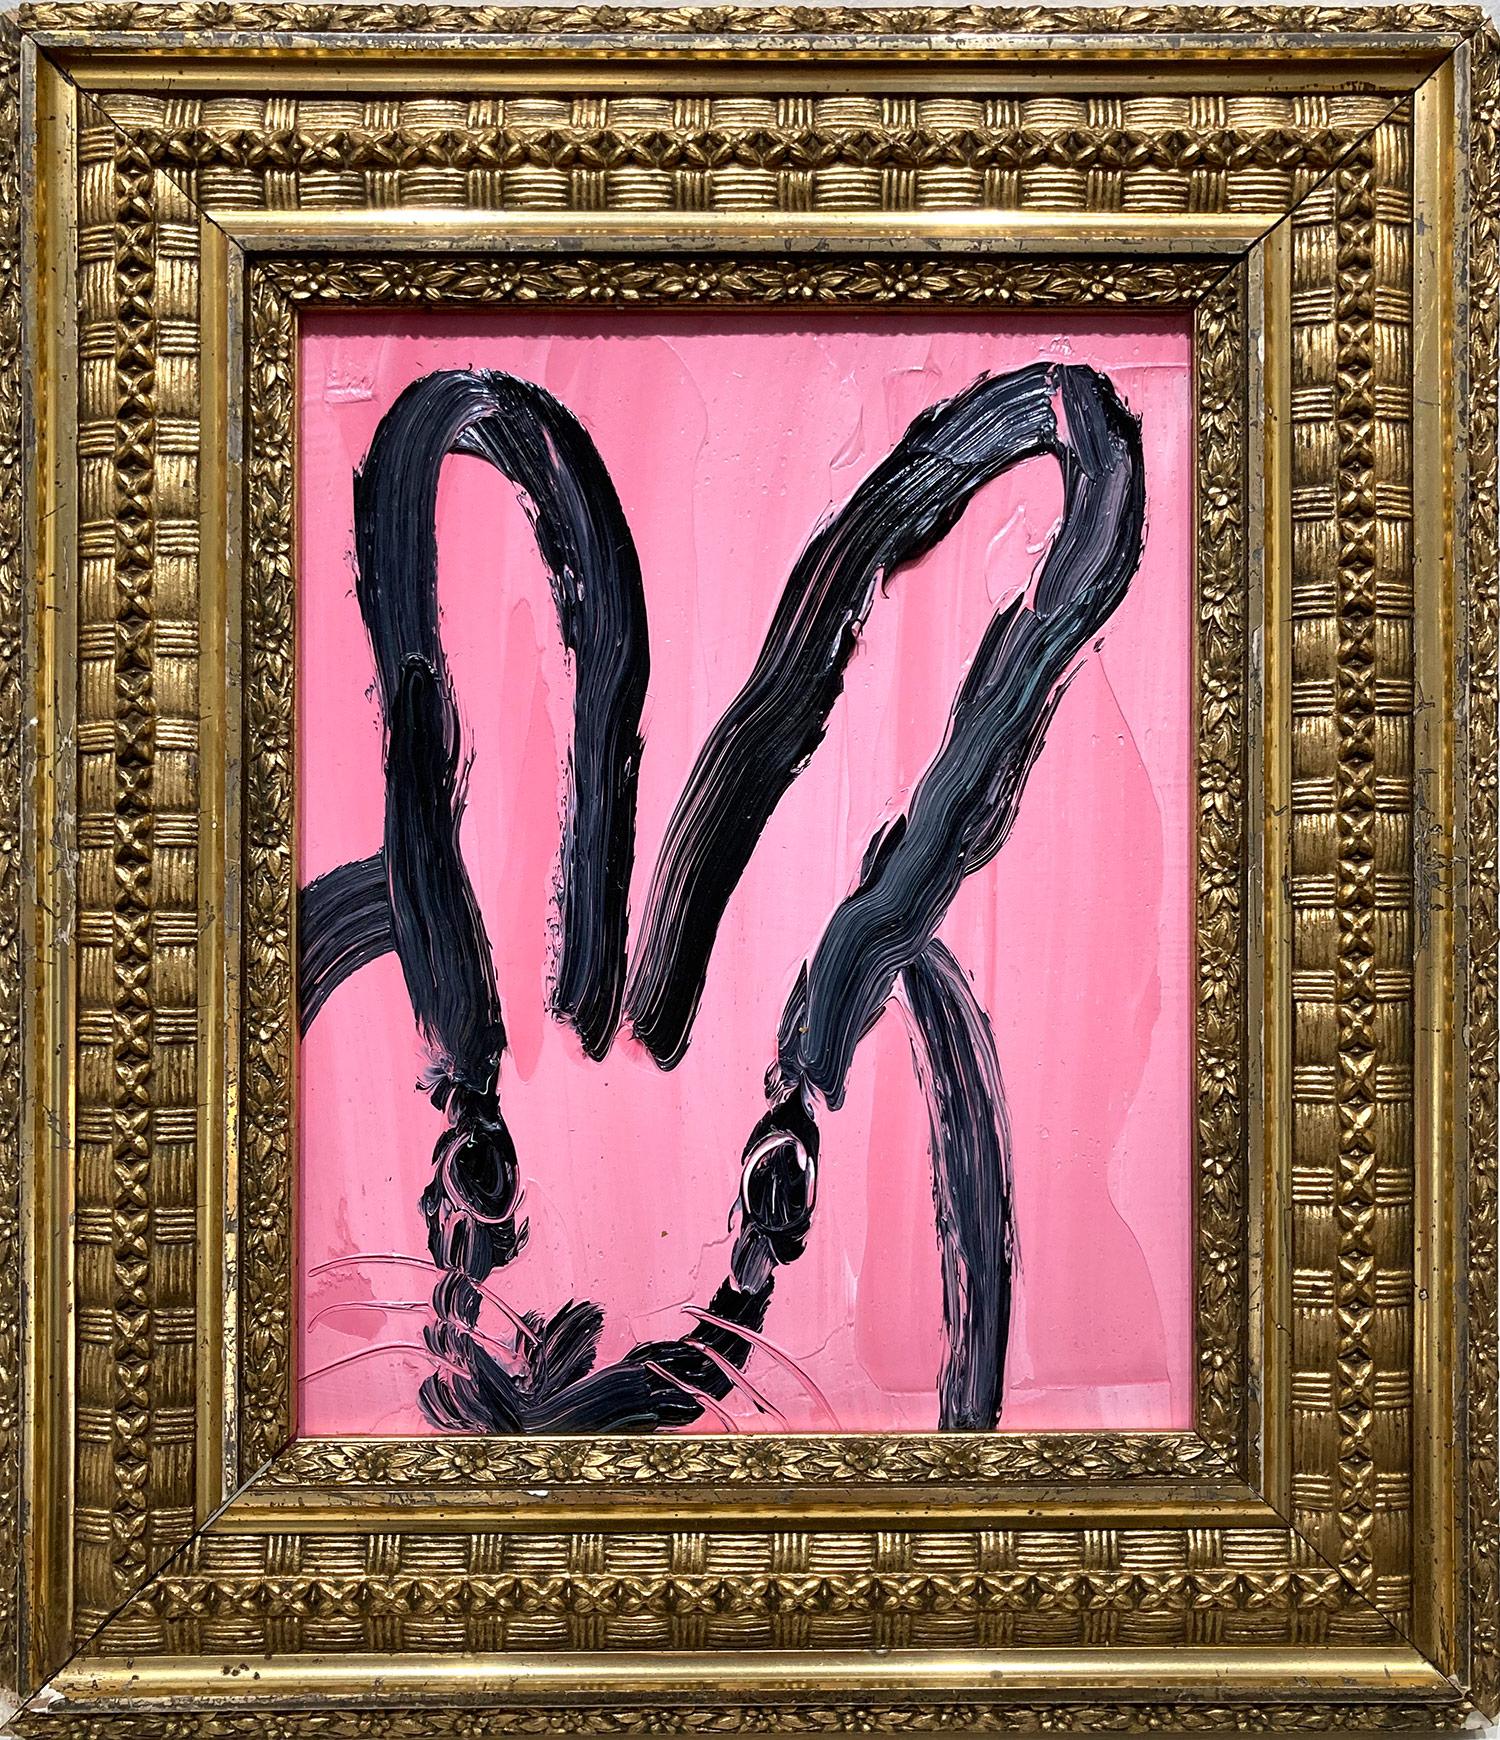 Hunt Slonem Abstract Painting - "Pink" Black Bunny on Light Pink Background Oil Painting on Wood Panel